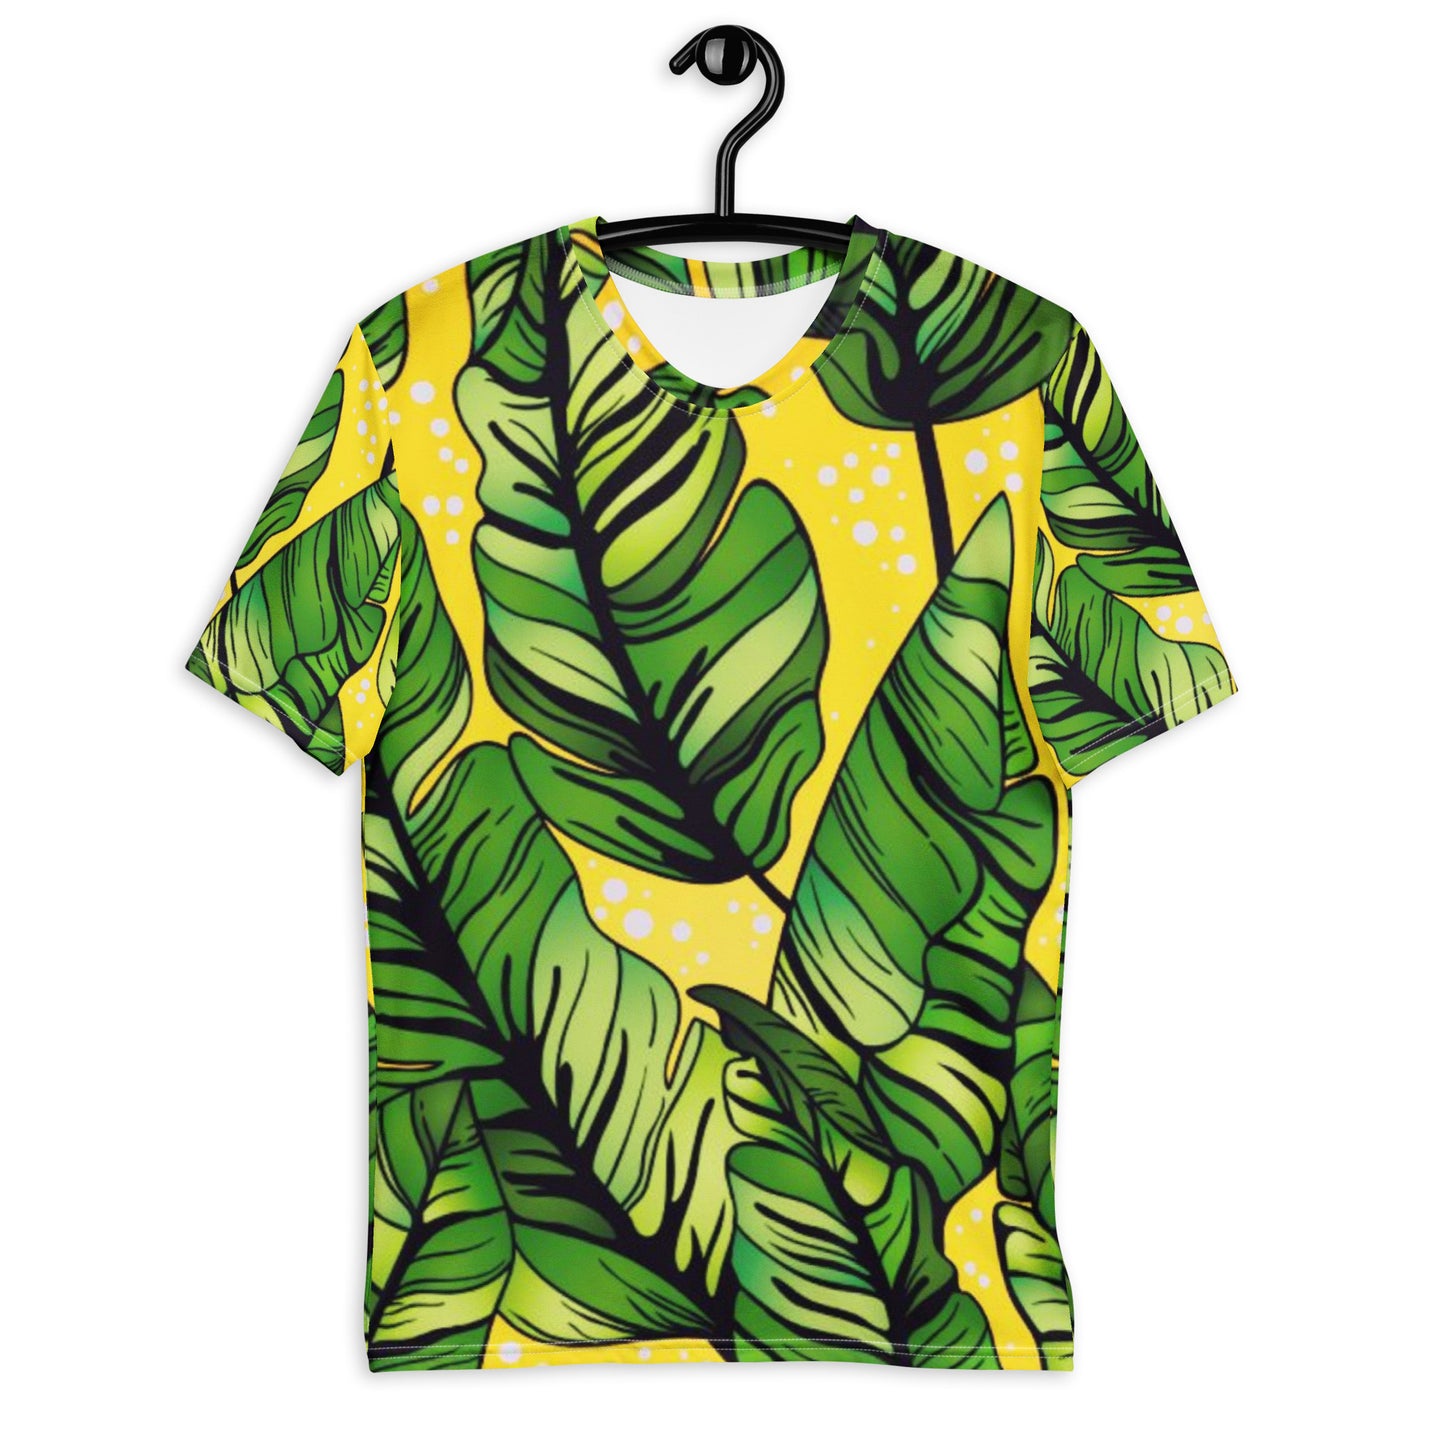 Men's t-shirt - O By Onica Online Store